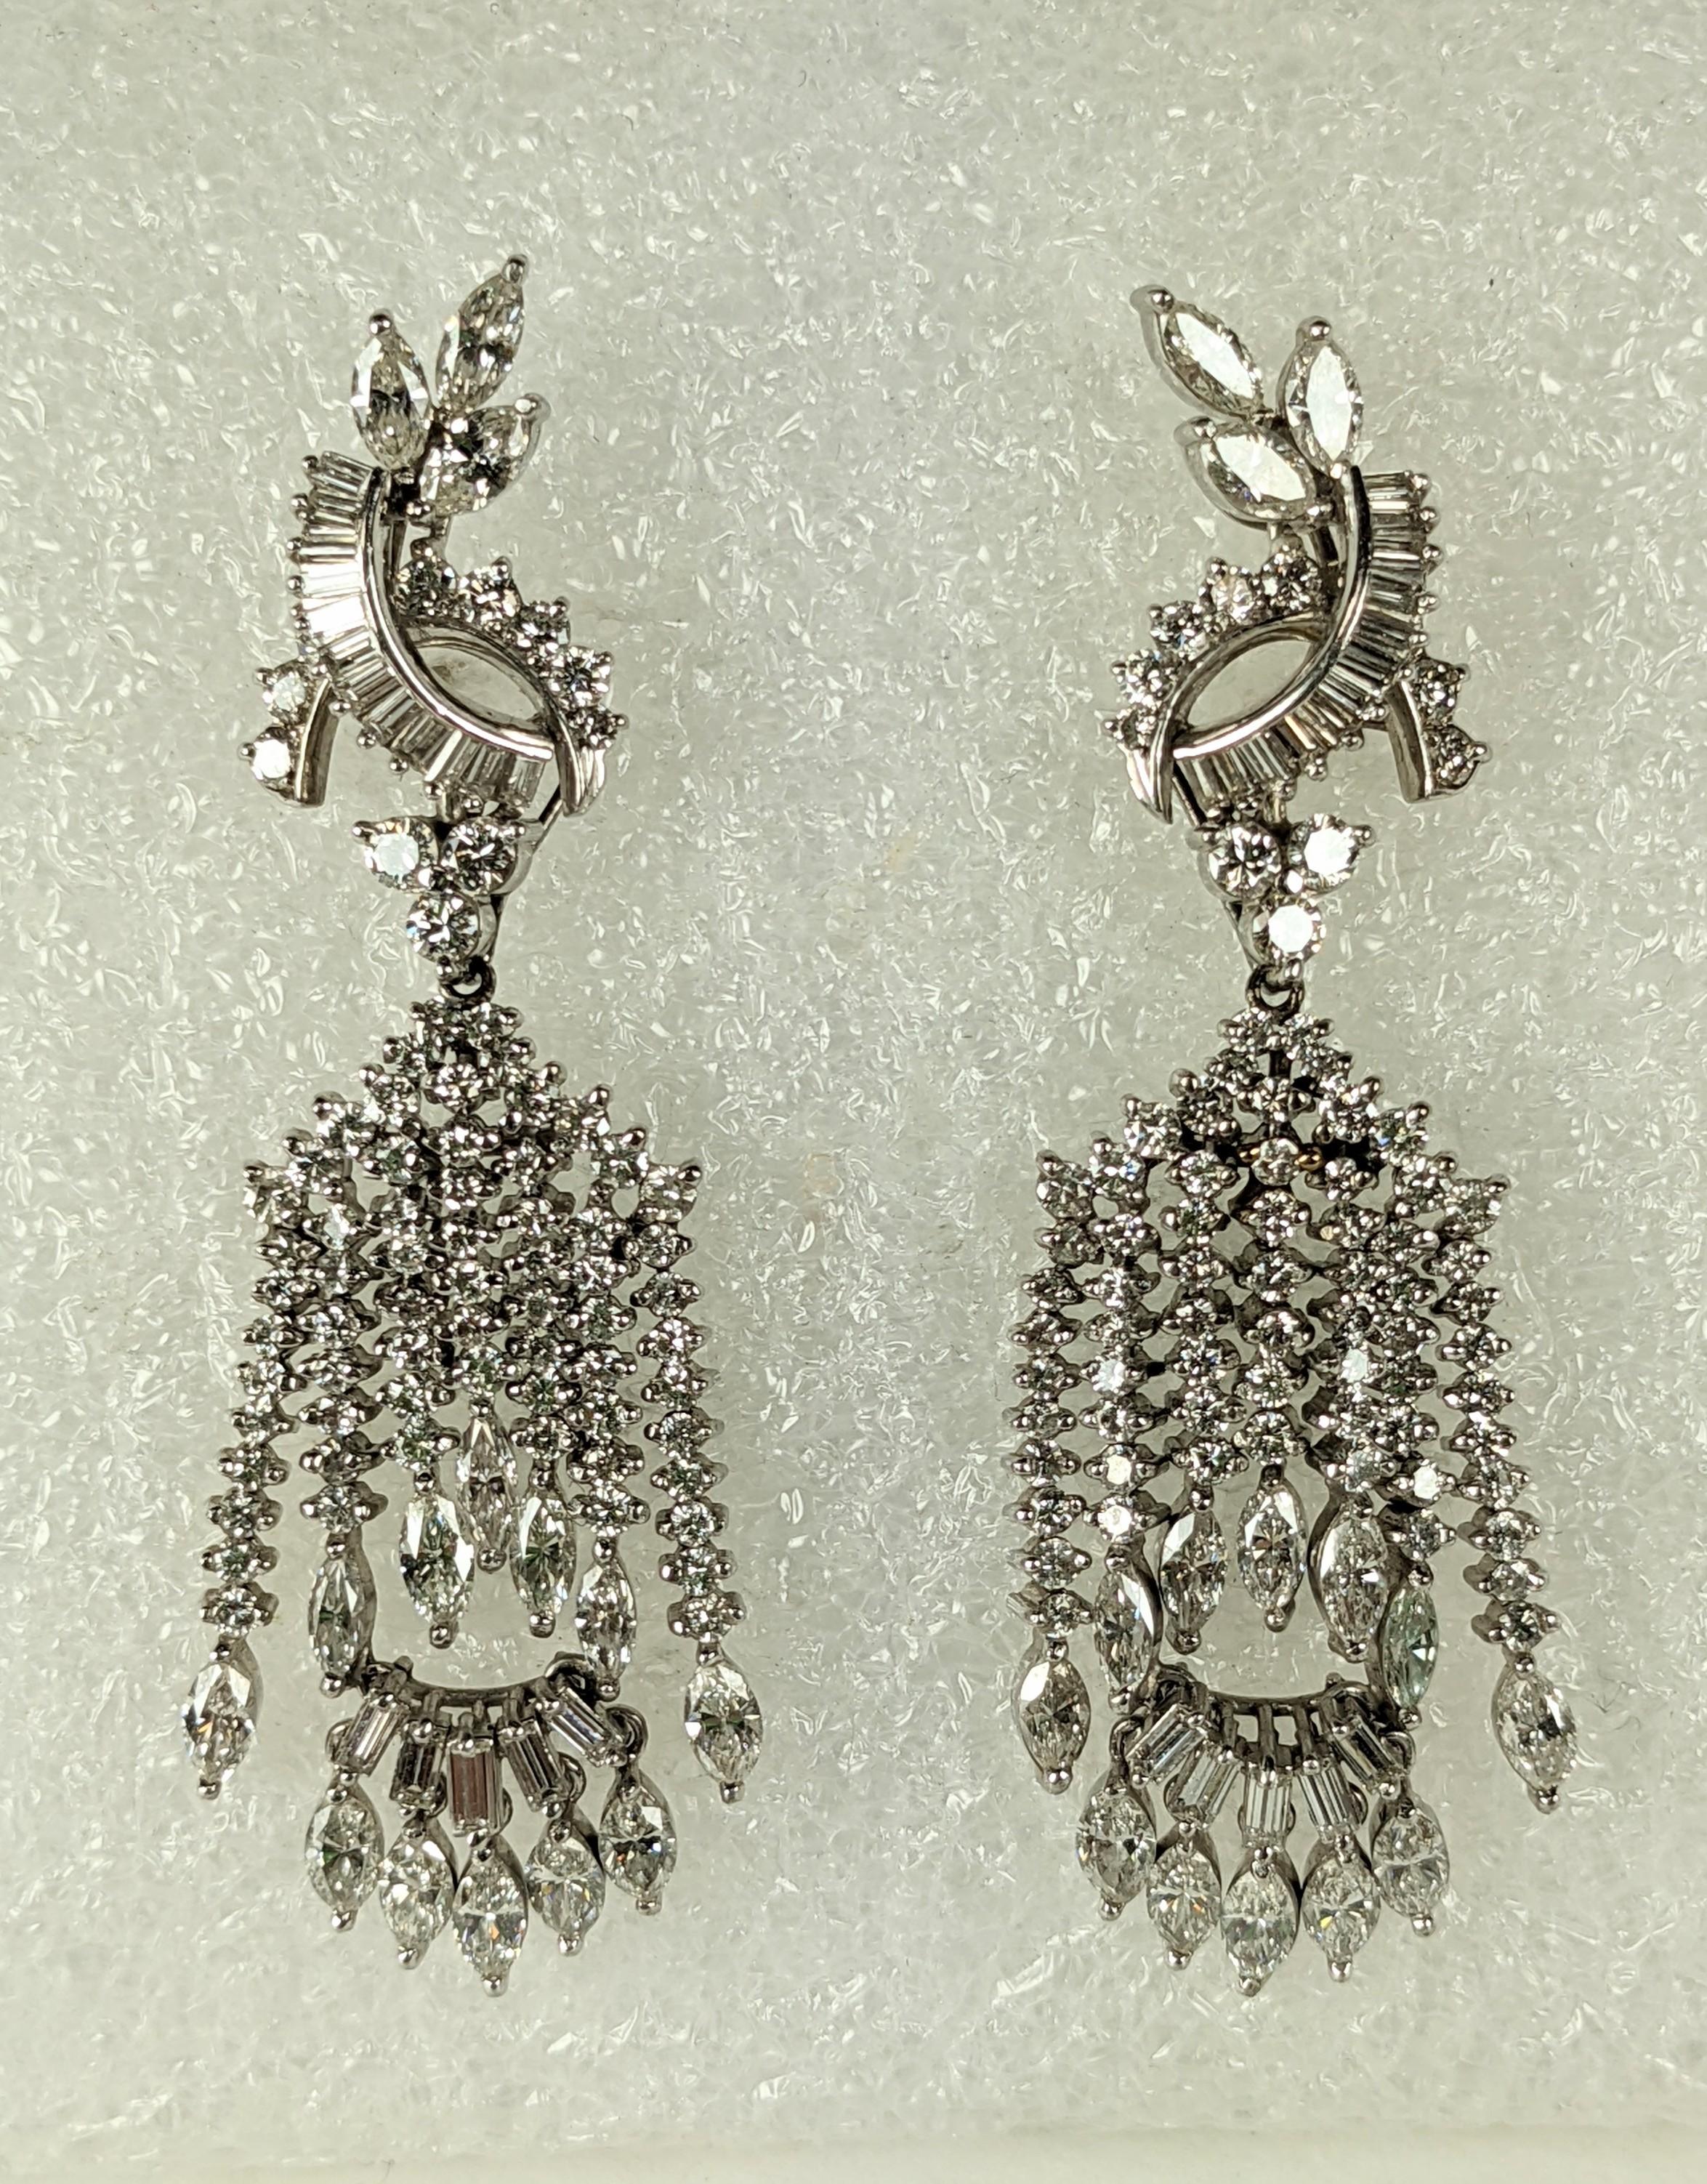 Unique Surrealist Diamond Articulated Dangling Man Earrings For Sale 7